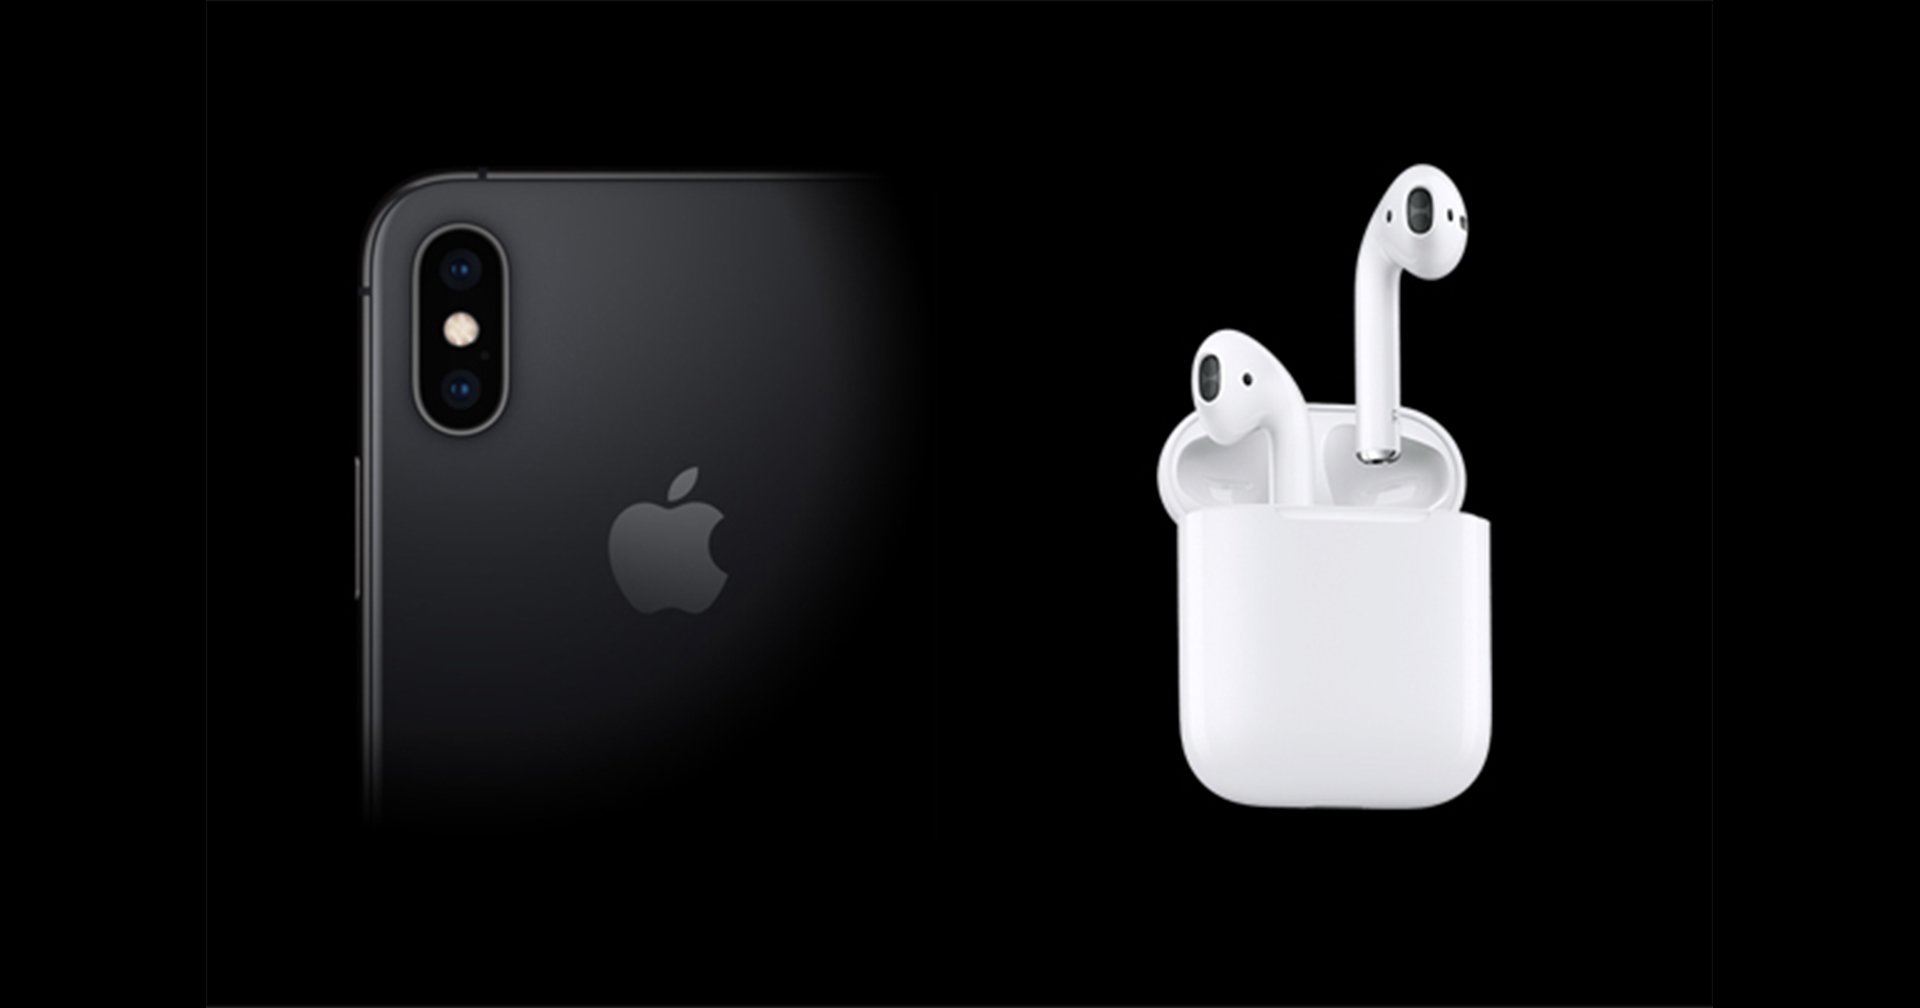 Airpods space. Apple AIRPODS 2. Apple AIRPODS Pro 3. Iphone AIRPODS Pro 2. Наушники TWS Apple AIRPODS 2.